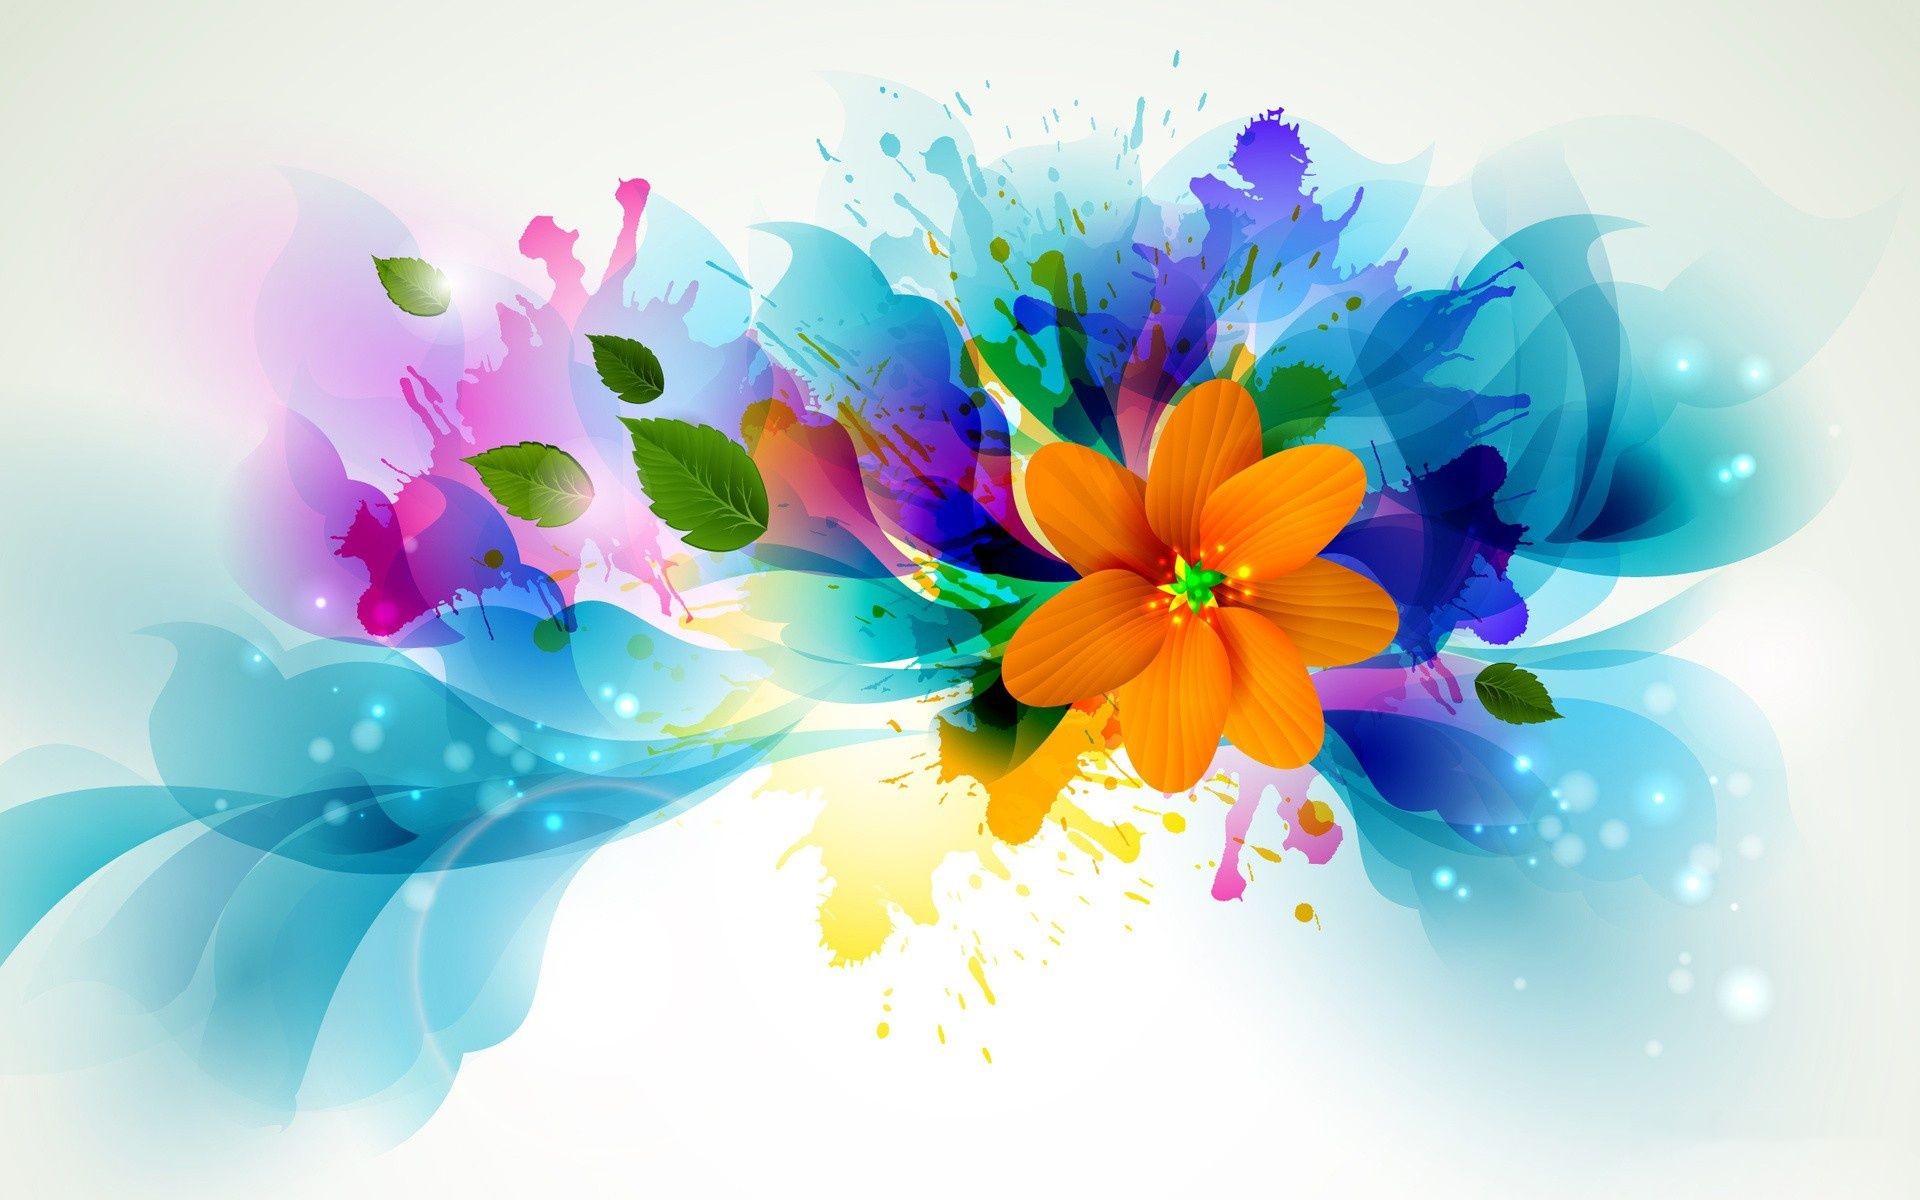 Art Background Images HD Pictures For Free Vectors  PSD Download   Lovepikcom